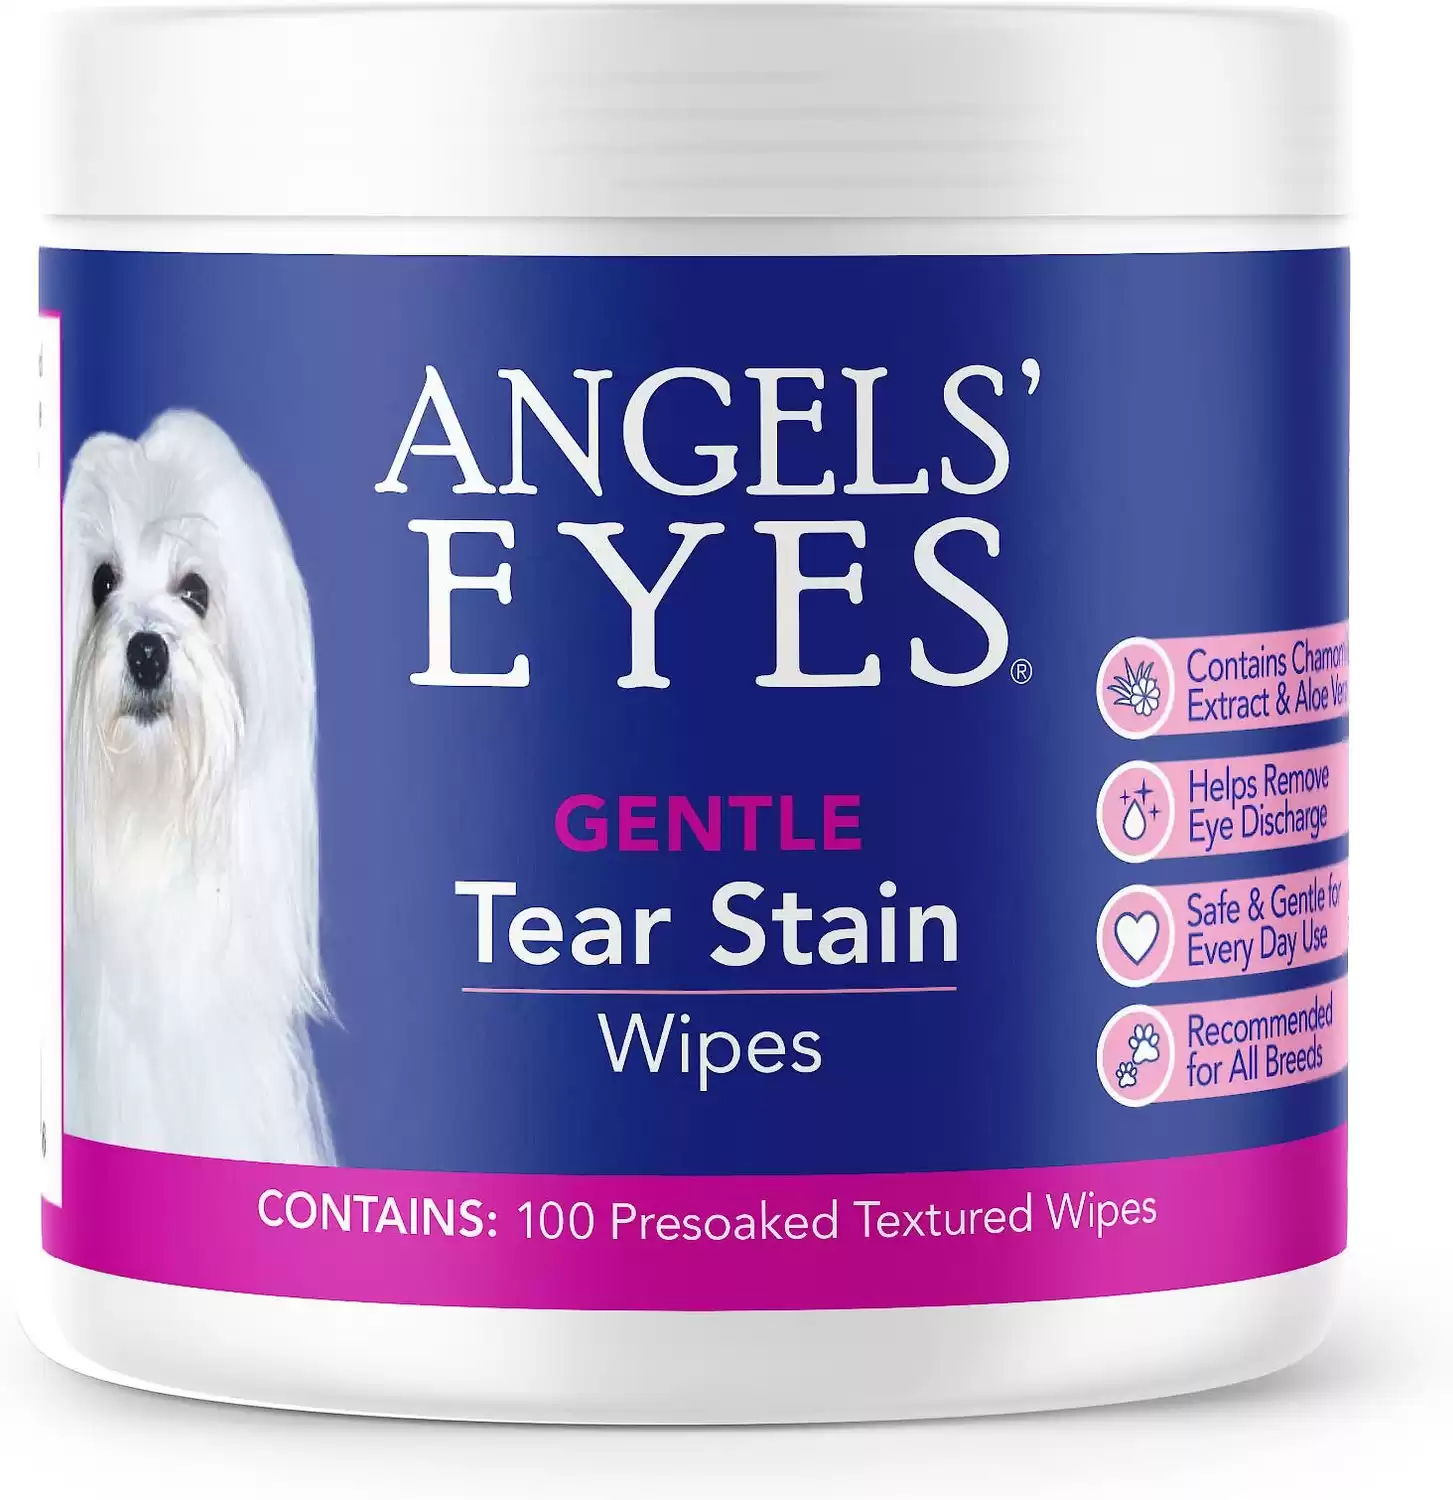 Angels' Eyes Gentle Tear Stain Wipes for Dogs